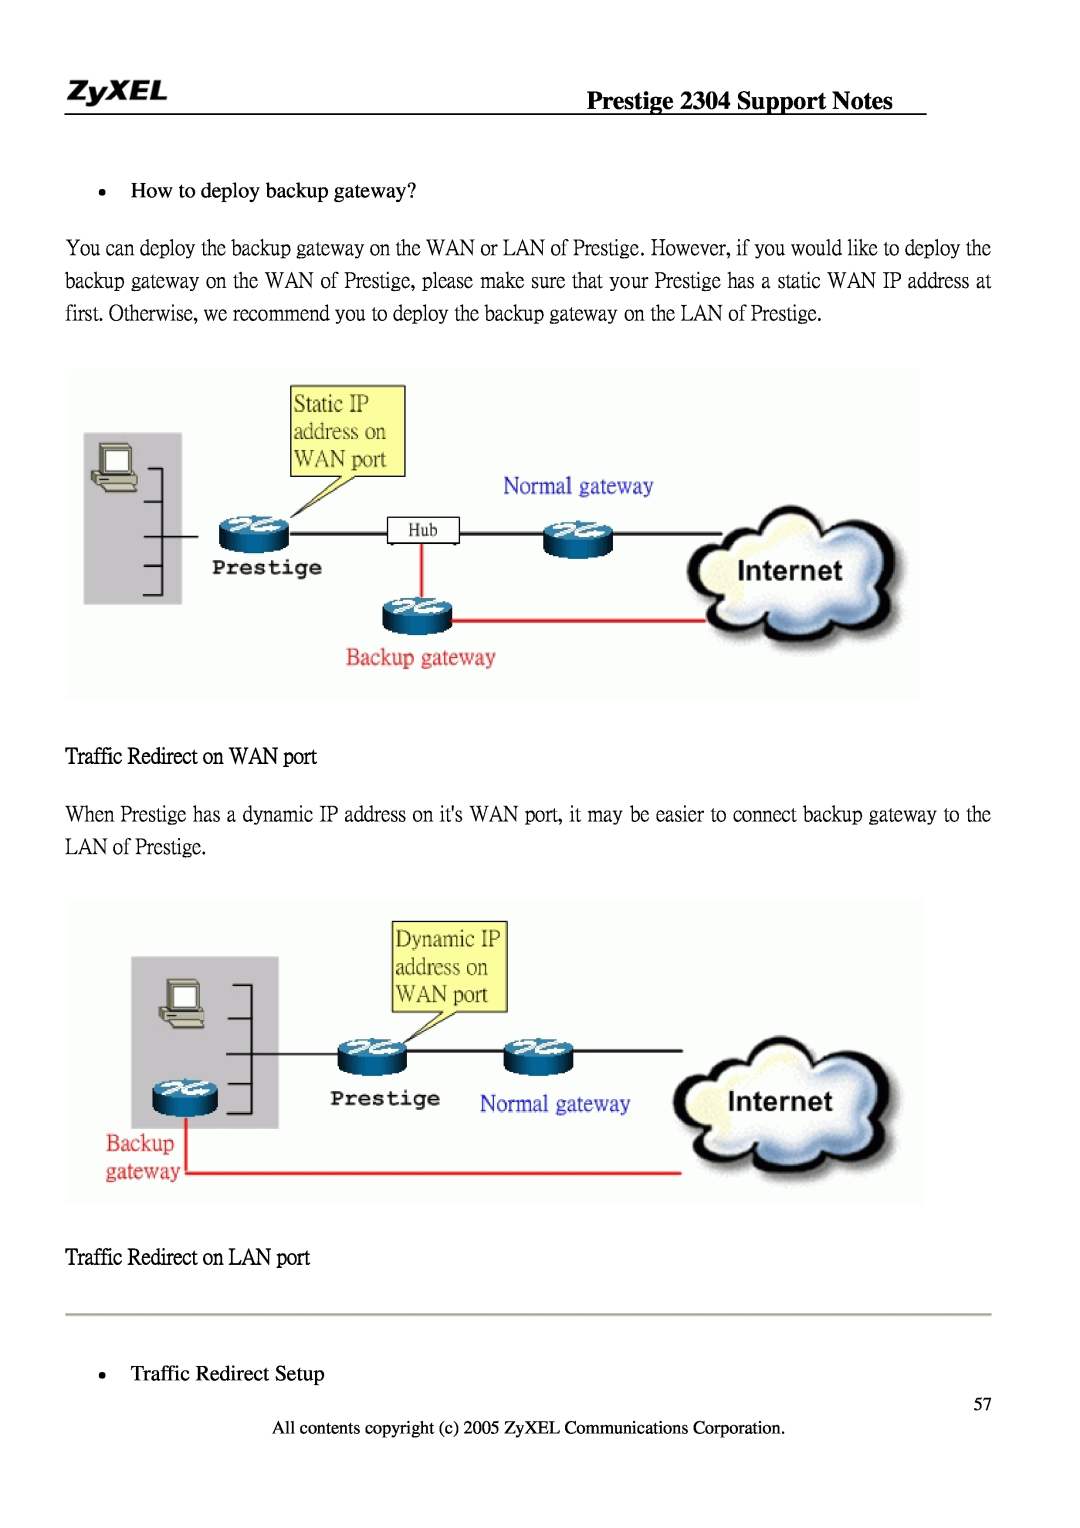 ZyXEL Communications 2304R-P1 Traffic Redirect on WAN port, Traffic Redirect on LAN port, Prestige 2304 Support Notes 